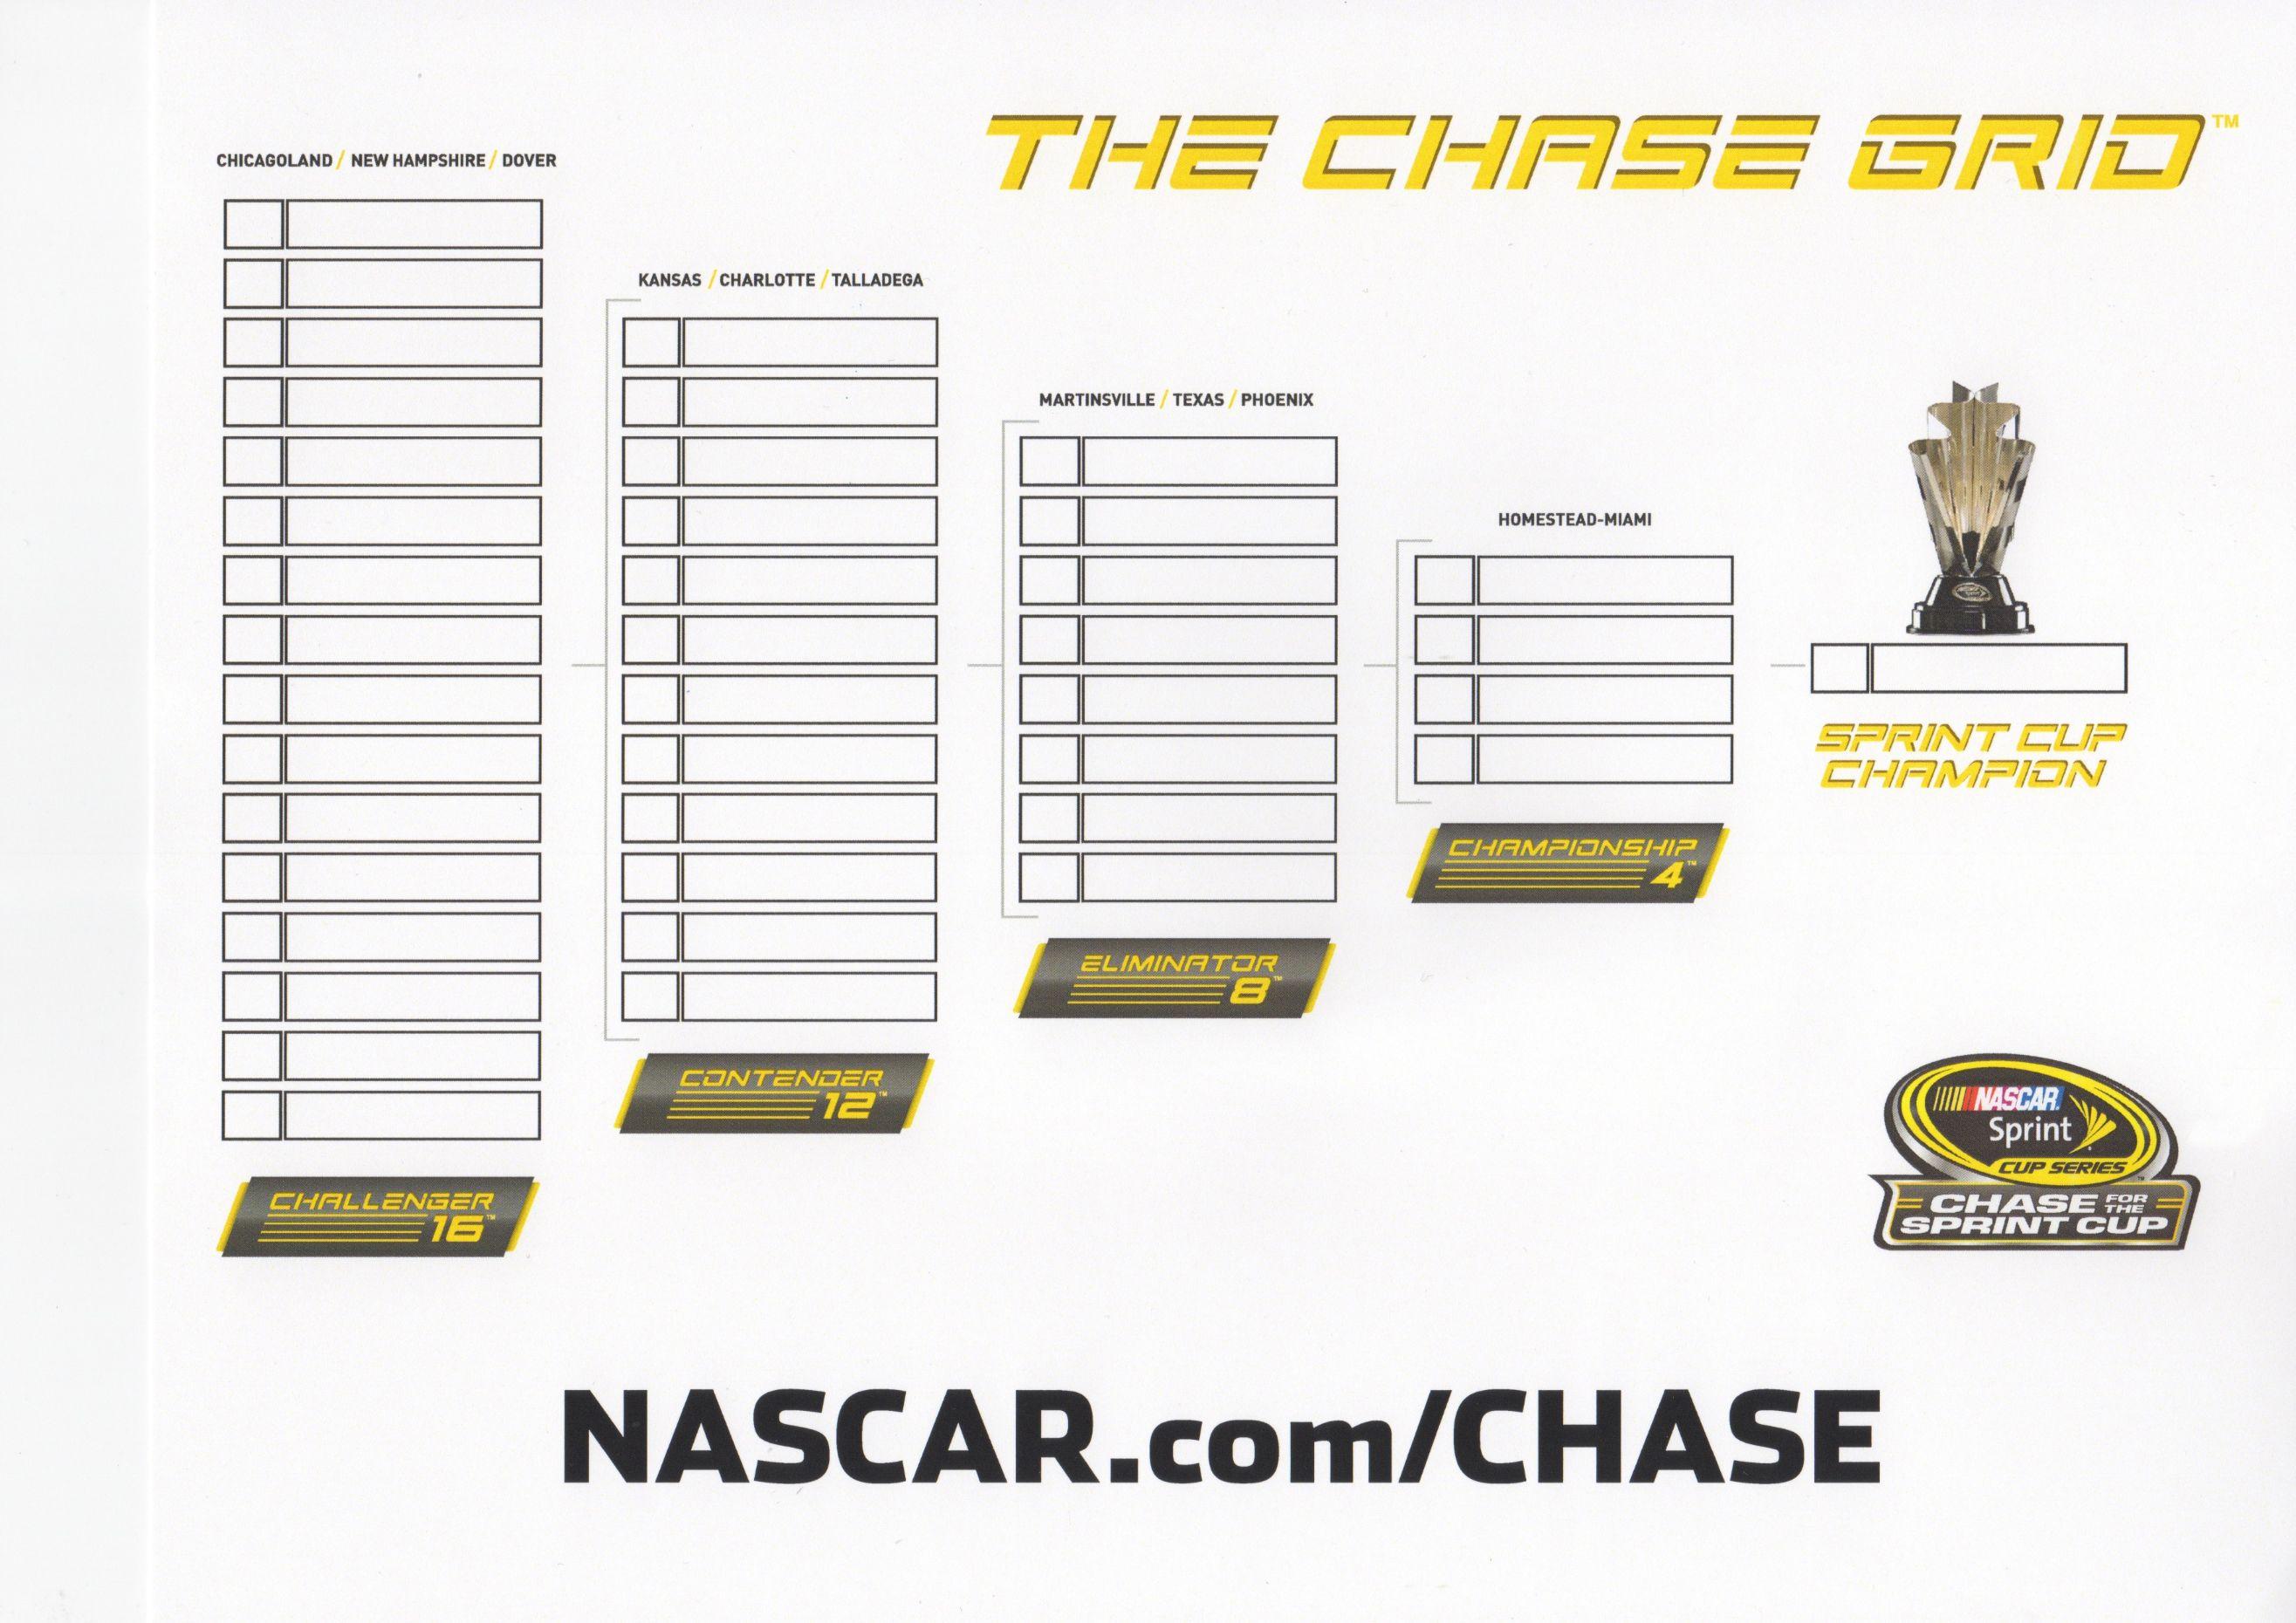 Printable NASCAR Logo - For anyone who was looking for one, here's a Printable Chase Bracket ...